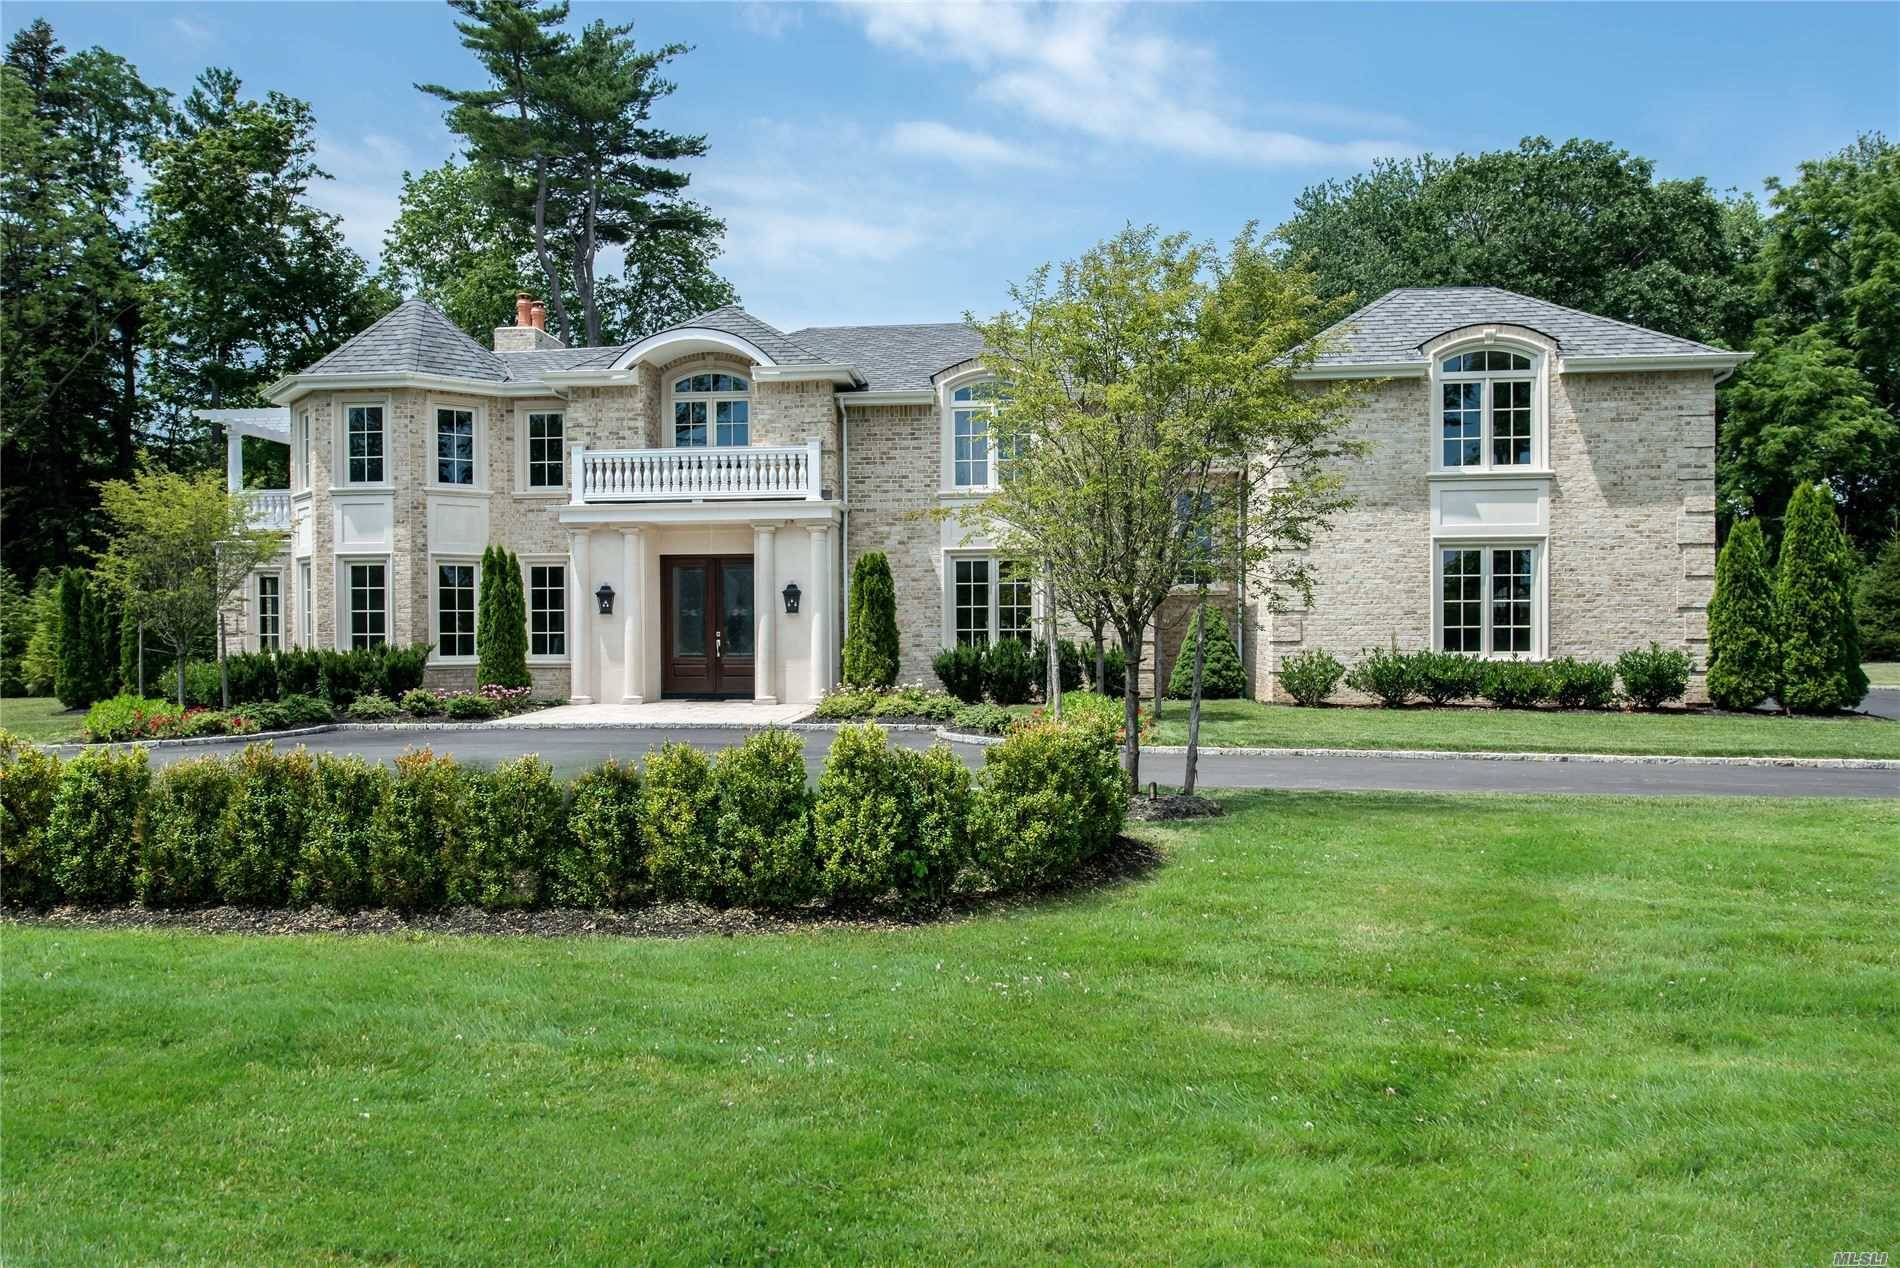 Set On 2Manicured Acres In The Exclusive, Gated, Hidden Pond Community Of OLD WESTBURY, This Young Elegant 6 Bedroom Brick Colonial Emphasizes A Luxury Lifestyle With All The Amenities You've ...